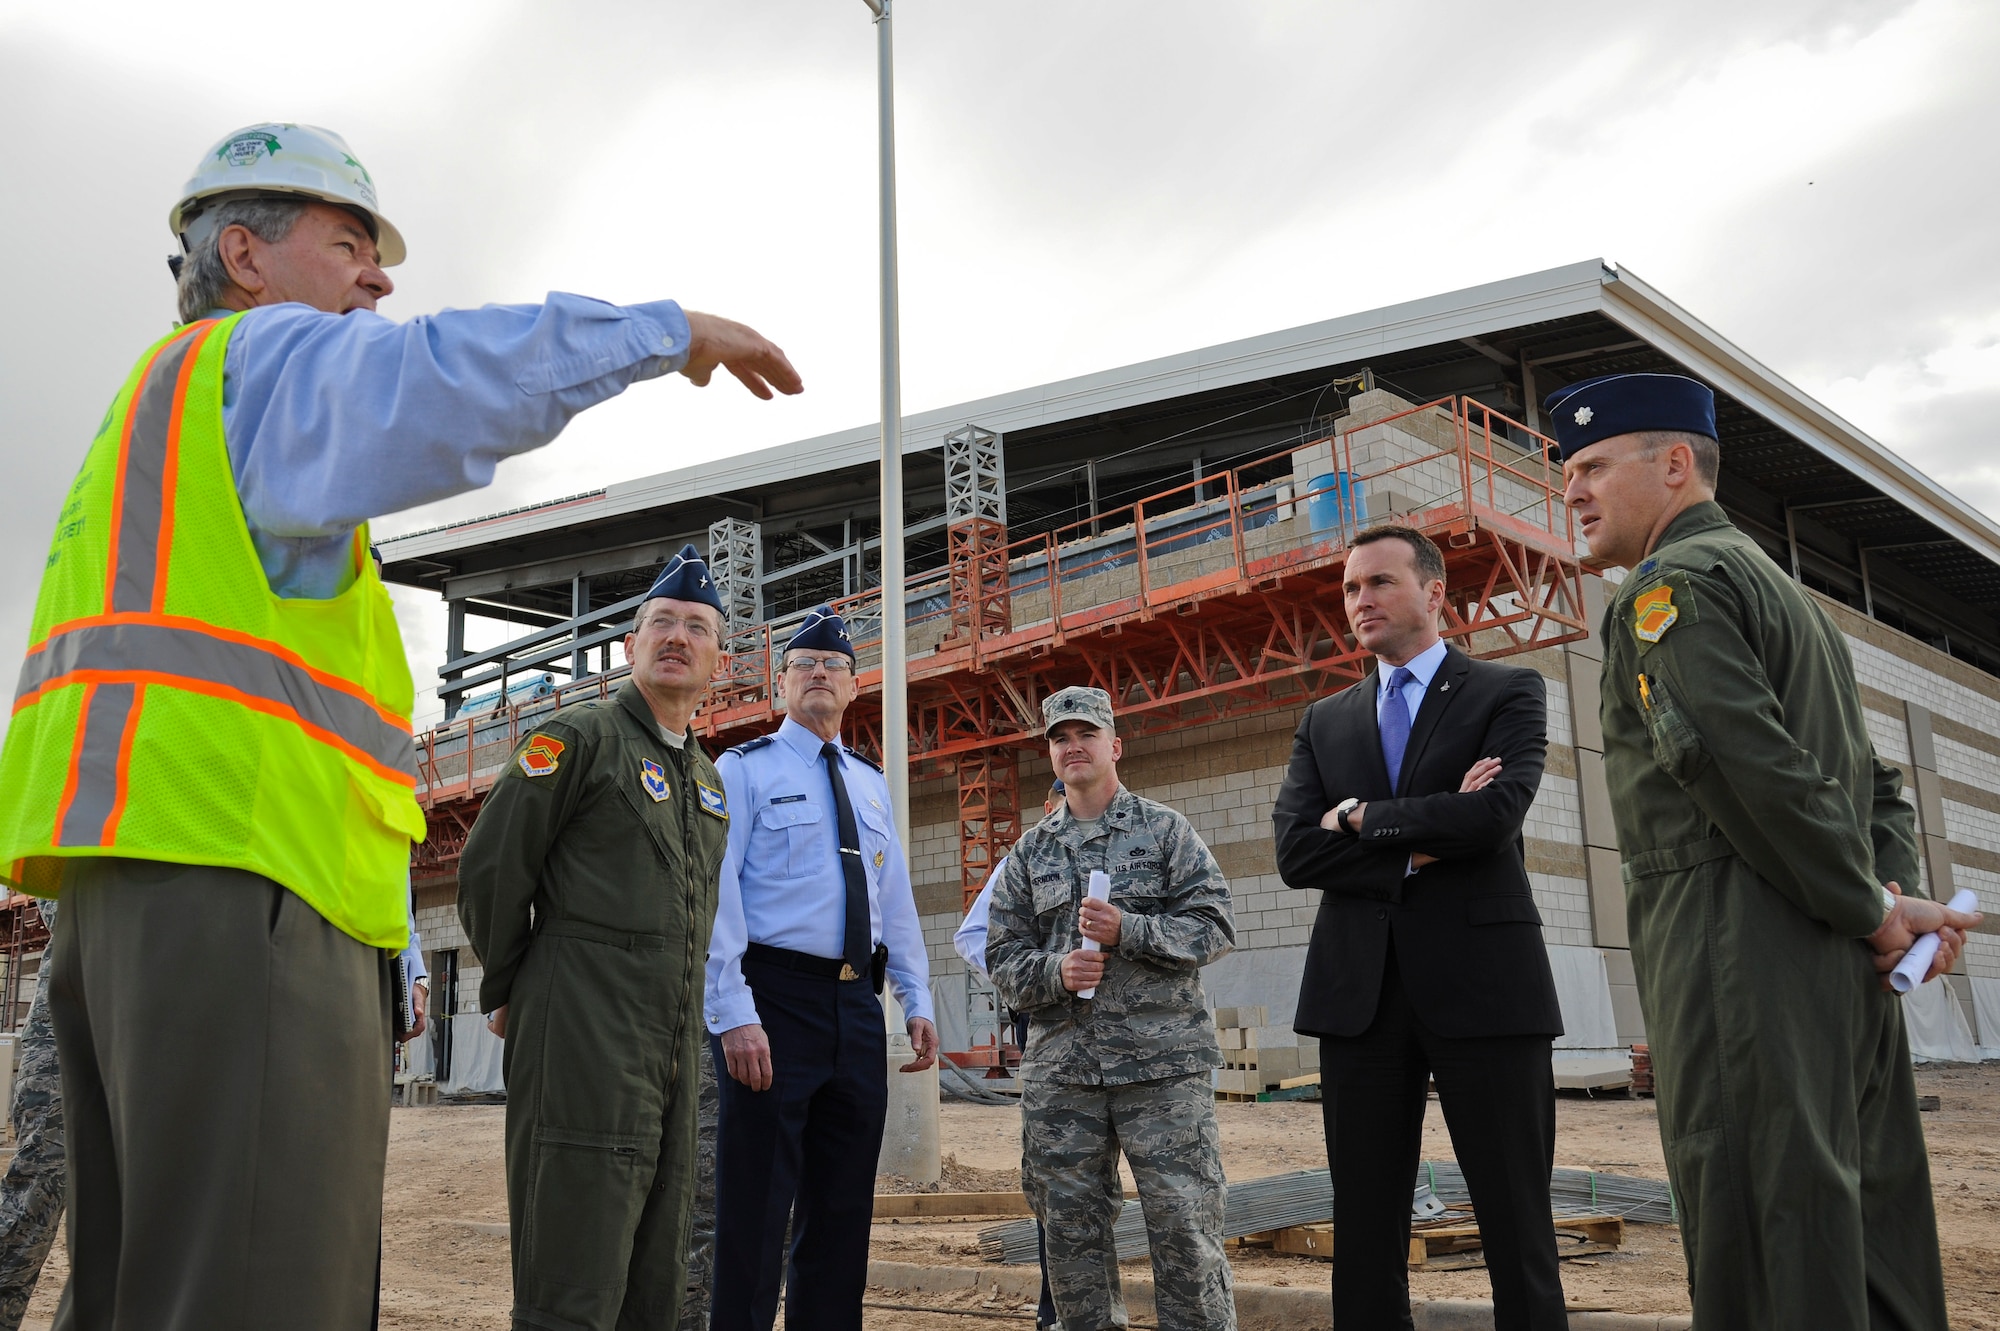 Undersecretary of the Air Force Eric Fanning is briefed by Craig Killmer during a tour of the Academic Training Center construction site on March 14, 2014, at Luke Air Force Base, Ariz. The 145,000 square-foot facility will include pilot academic training classrooms, 12 F-35 simulators, a secured briefing auditorium, and space for administrative, instructor and engineering personnel. Killmer is the Archer Western Contractors project manager. (U.S. Air Force photo/Staff Sgt. Darlene Seltmann)